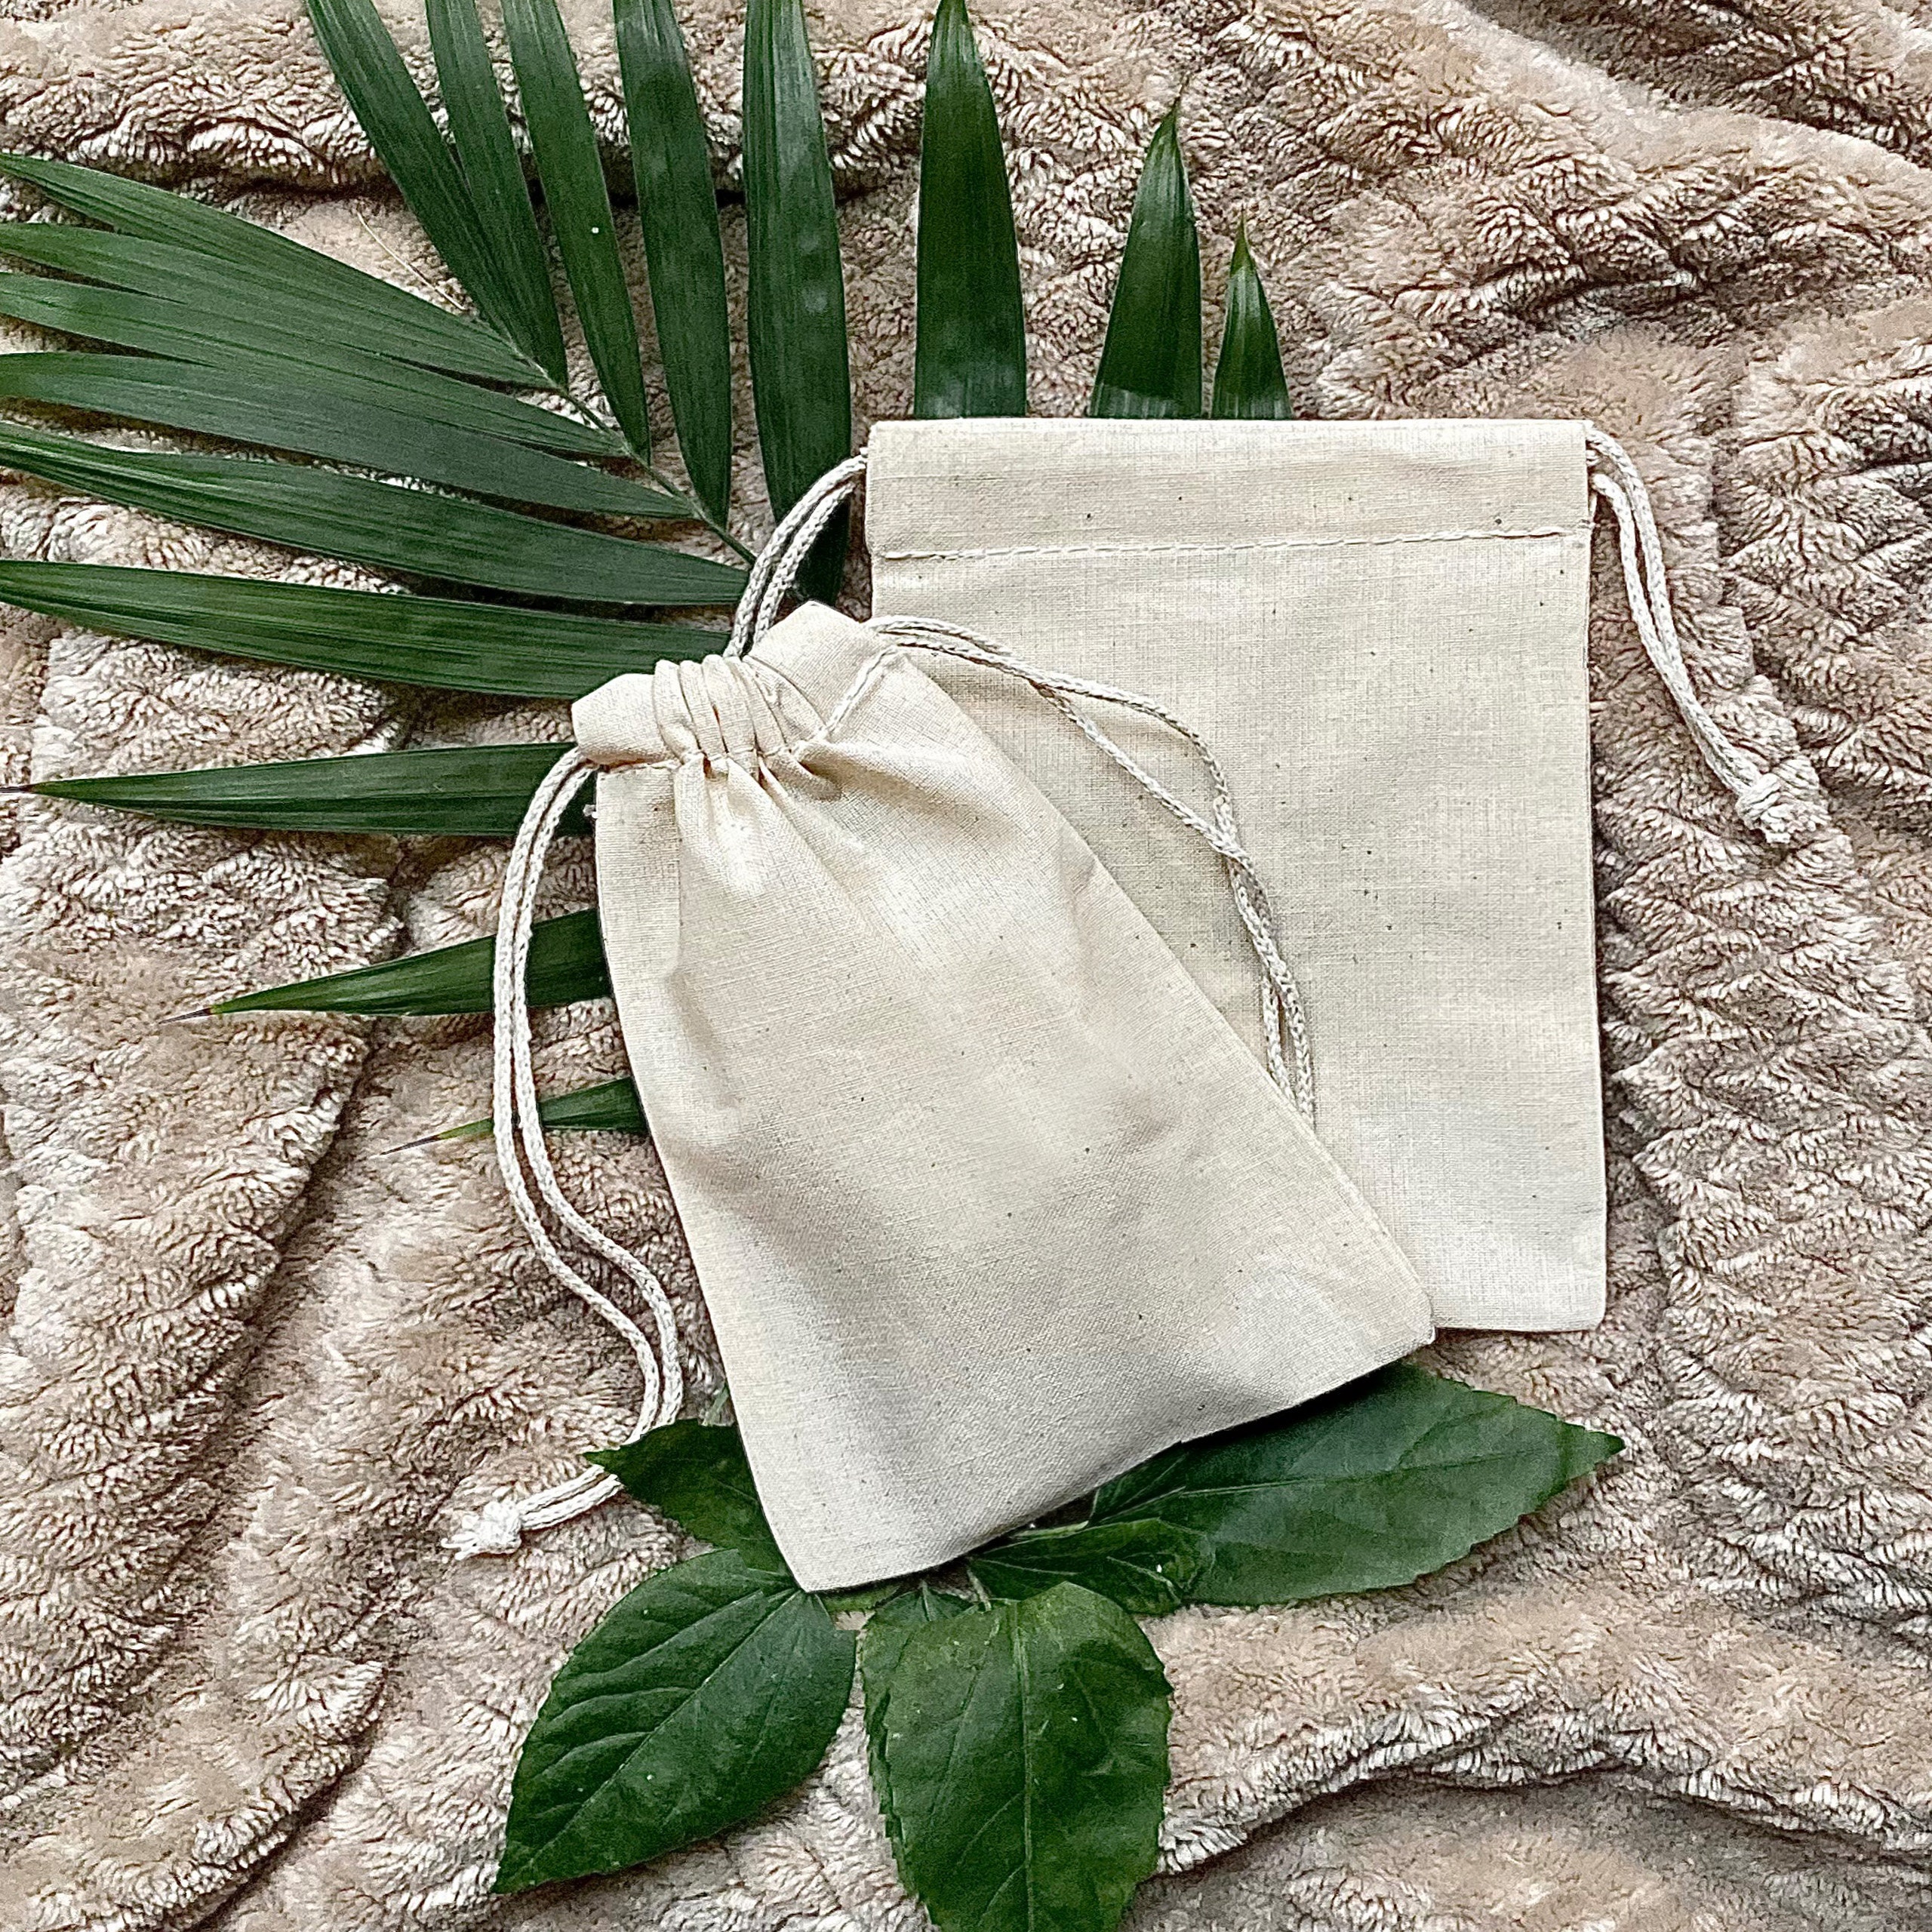 Celestial Gifts Muslin Bags with Drawstring 50 pcs - 3 x 5 100% Cotton -  Made in USA - Canvas Bags Bulk, Small Drawstring Bags, Reusable Tea Bags